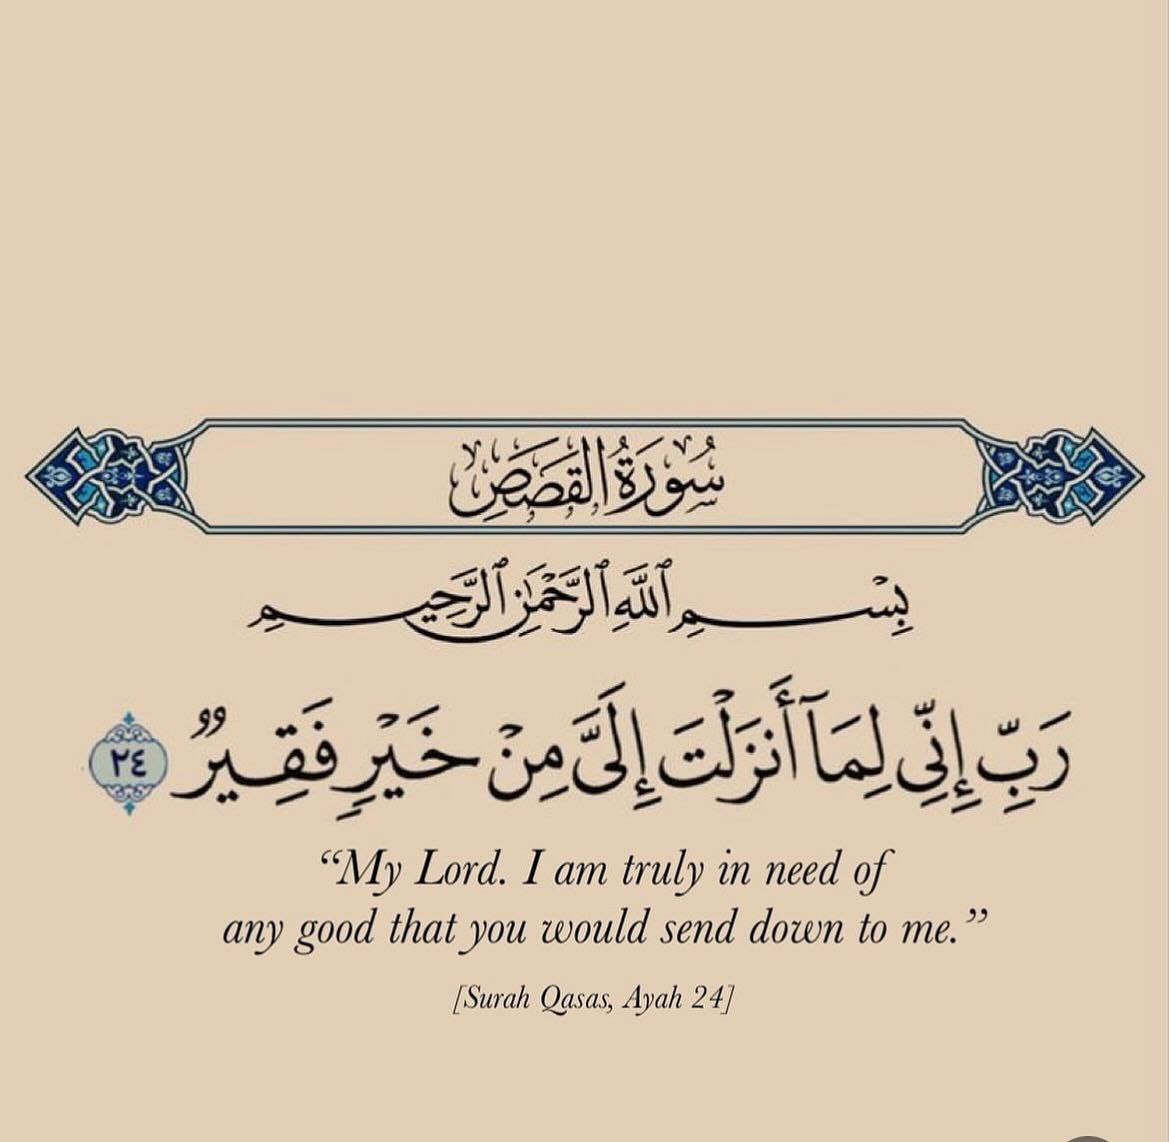 My Lord, I'm truly in need of any good that you would send down to me.